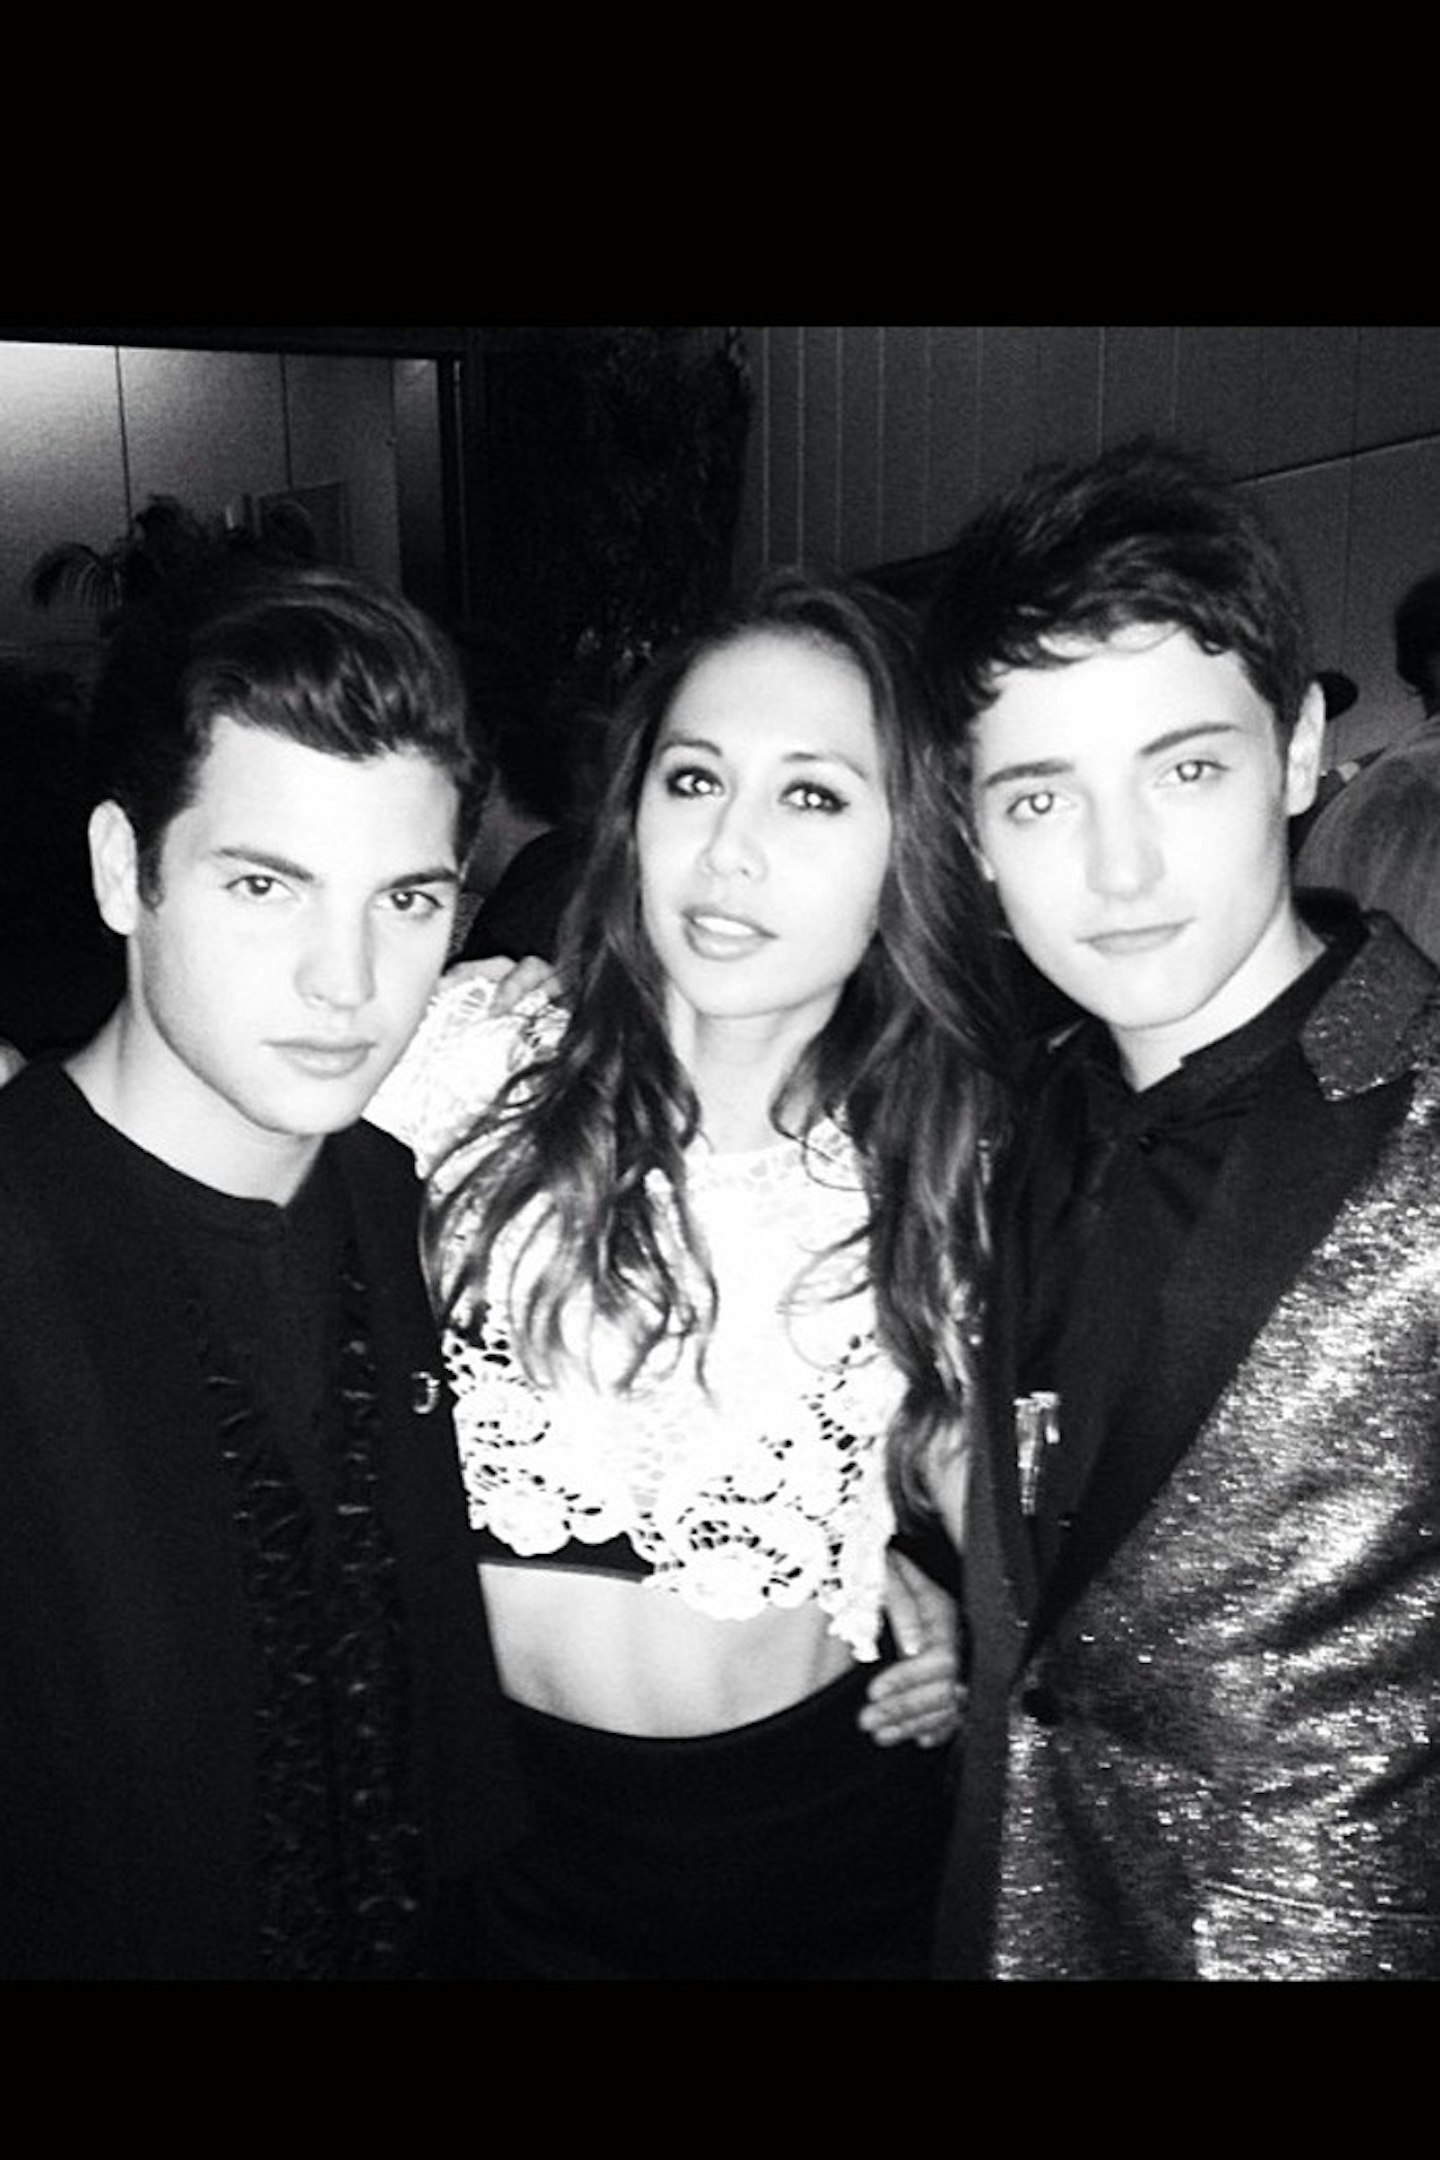 @rumineely: At the @crfashionbook Mademoiselle C party with @harry_brant #peterbrant..congrats Carine!